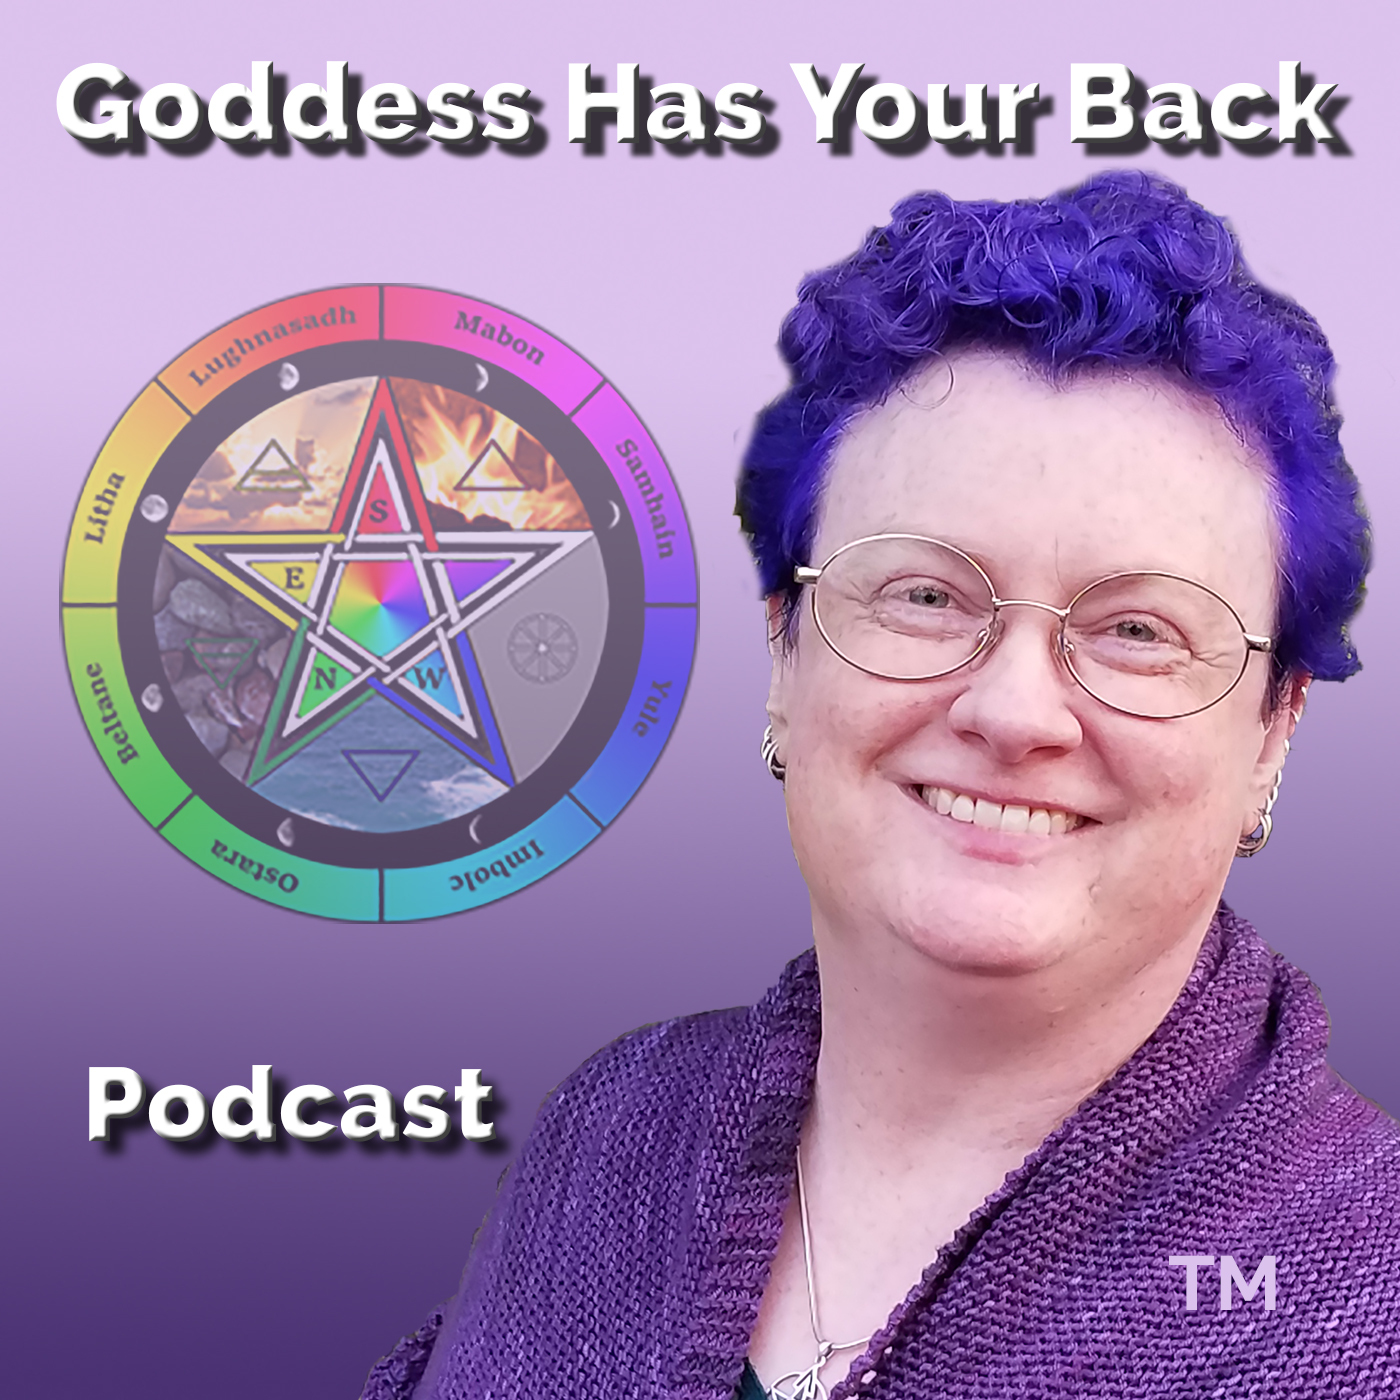 Episode 2 Of Gods and Wiccans - Interview